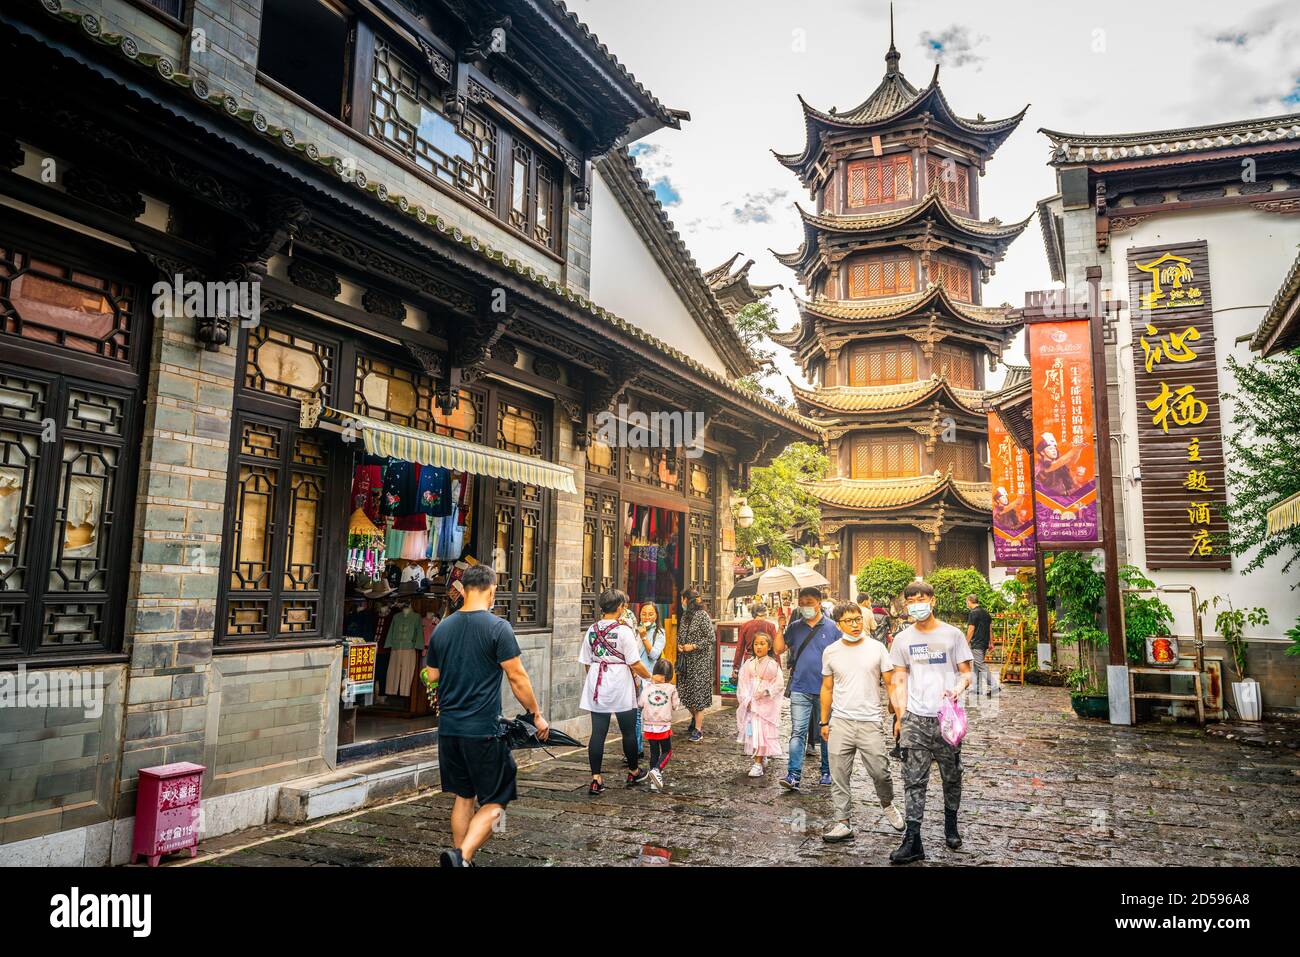 Kunming China , 3 October 2020 : Alley with old buildings and people at Yunnan Ethnic Village in Kunming Yunnan China Stock Photo